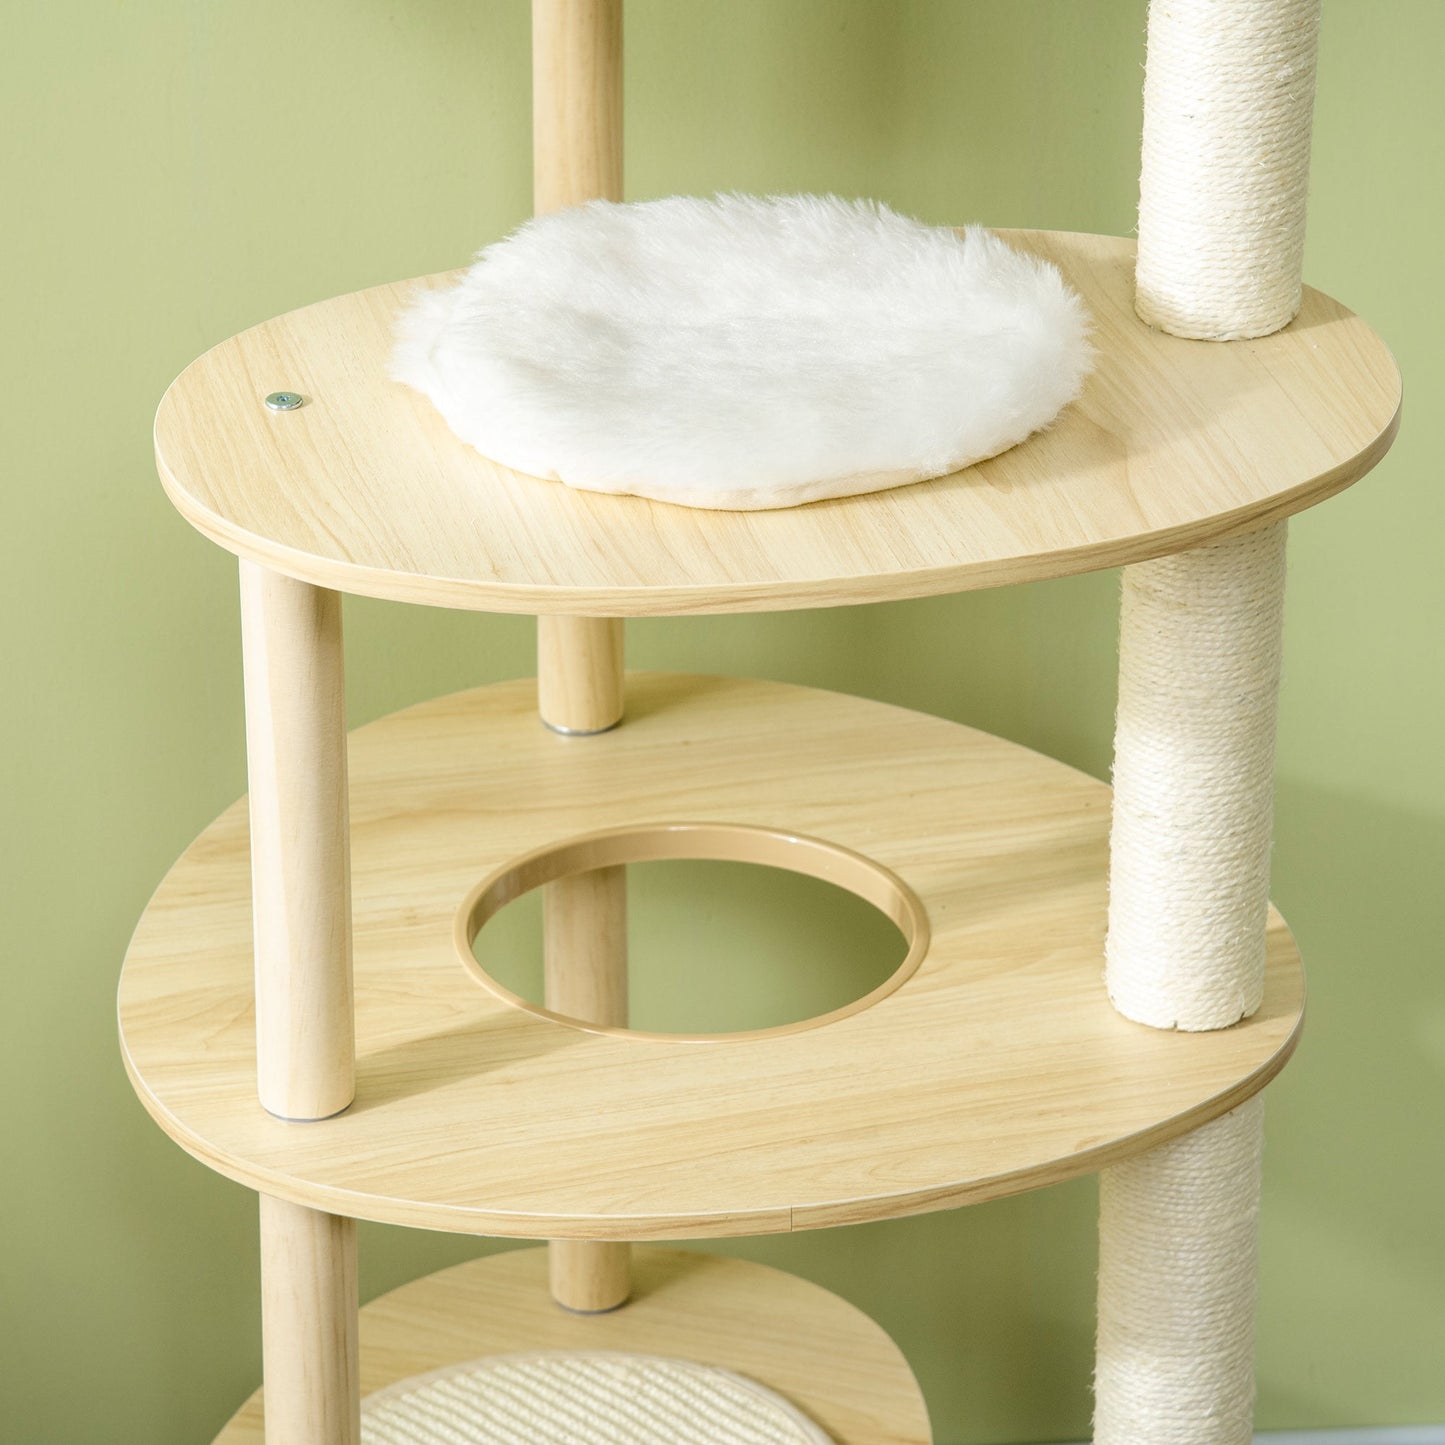 49" Cat Tree Multi-Level Kitty Tower with Scratching Post, Cat Bed, Perch, Cushion, Anti-toppling Device, Oak - Gallery Canada